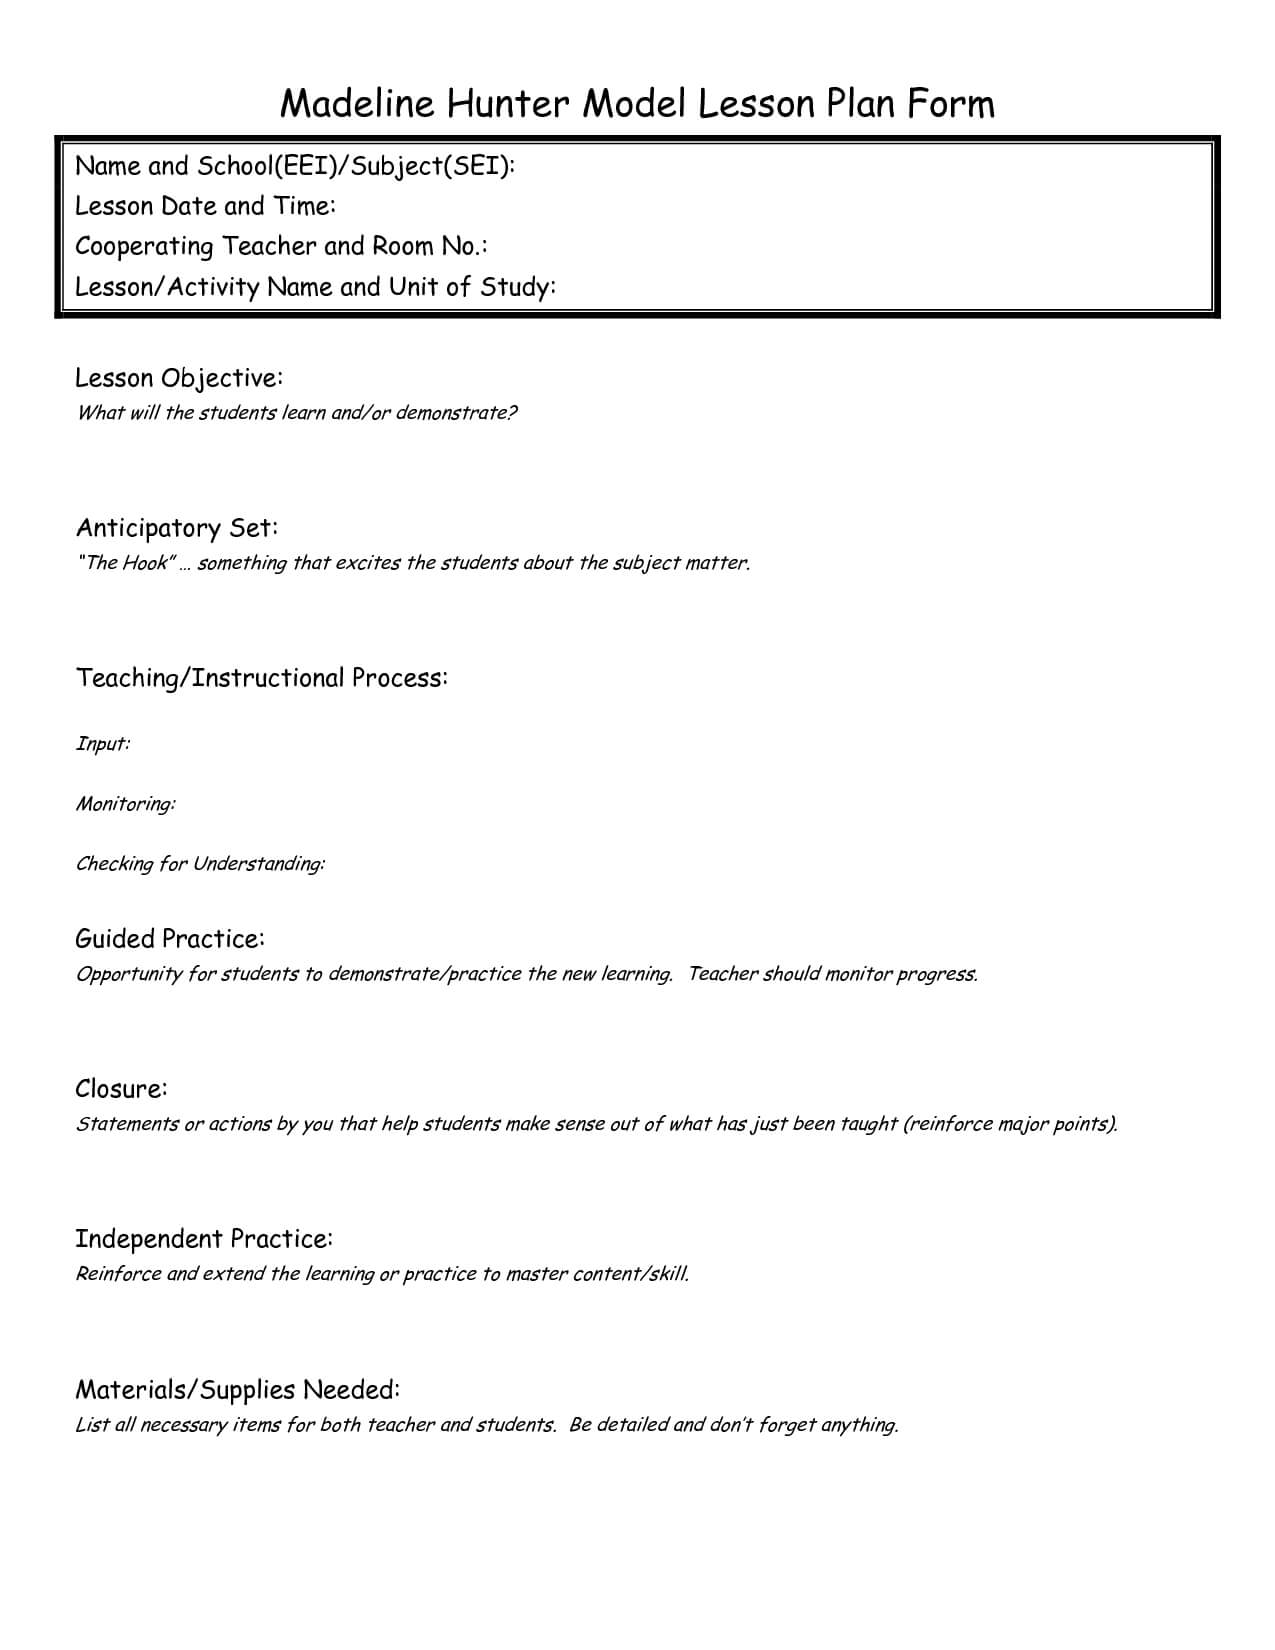 Madeline Hunter Lesson Plan Format Template - Google Search Throughout Madeline Hunter Lesson Plan Template Blank